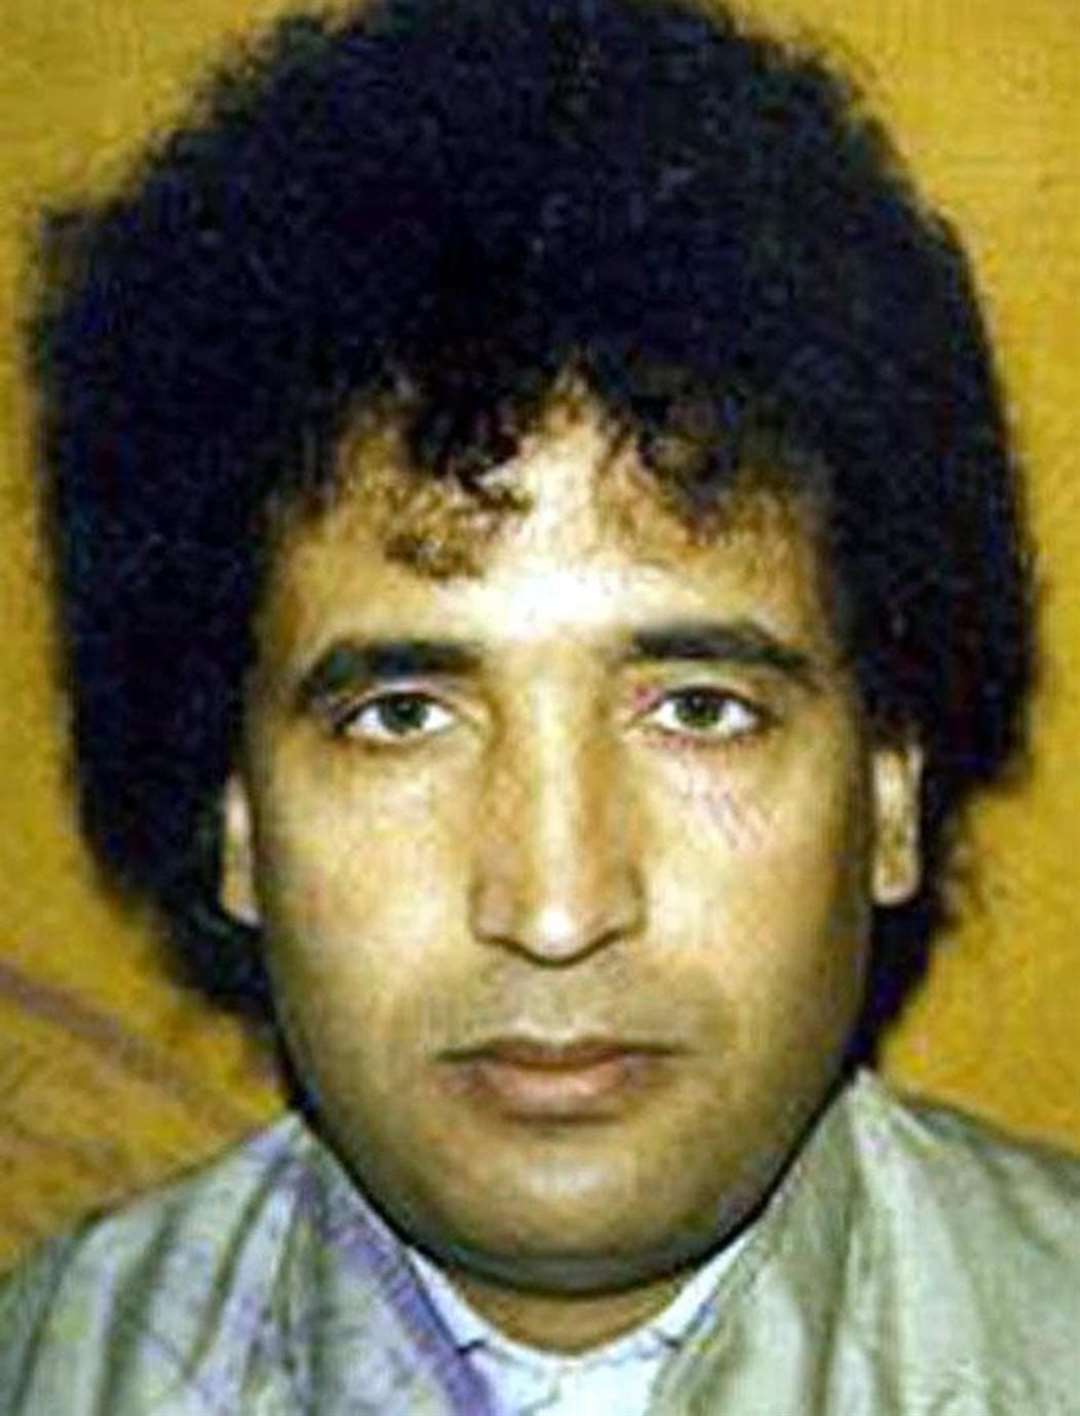 Megrahi, who was found guilty in 2001 of mass murder and jailed for life with a minimum term of 27 years, was the only person convicted of the attack (Cown Office/PA)